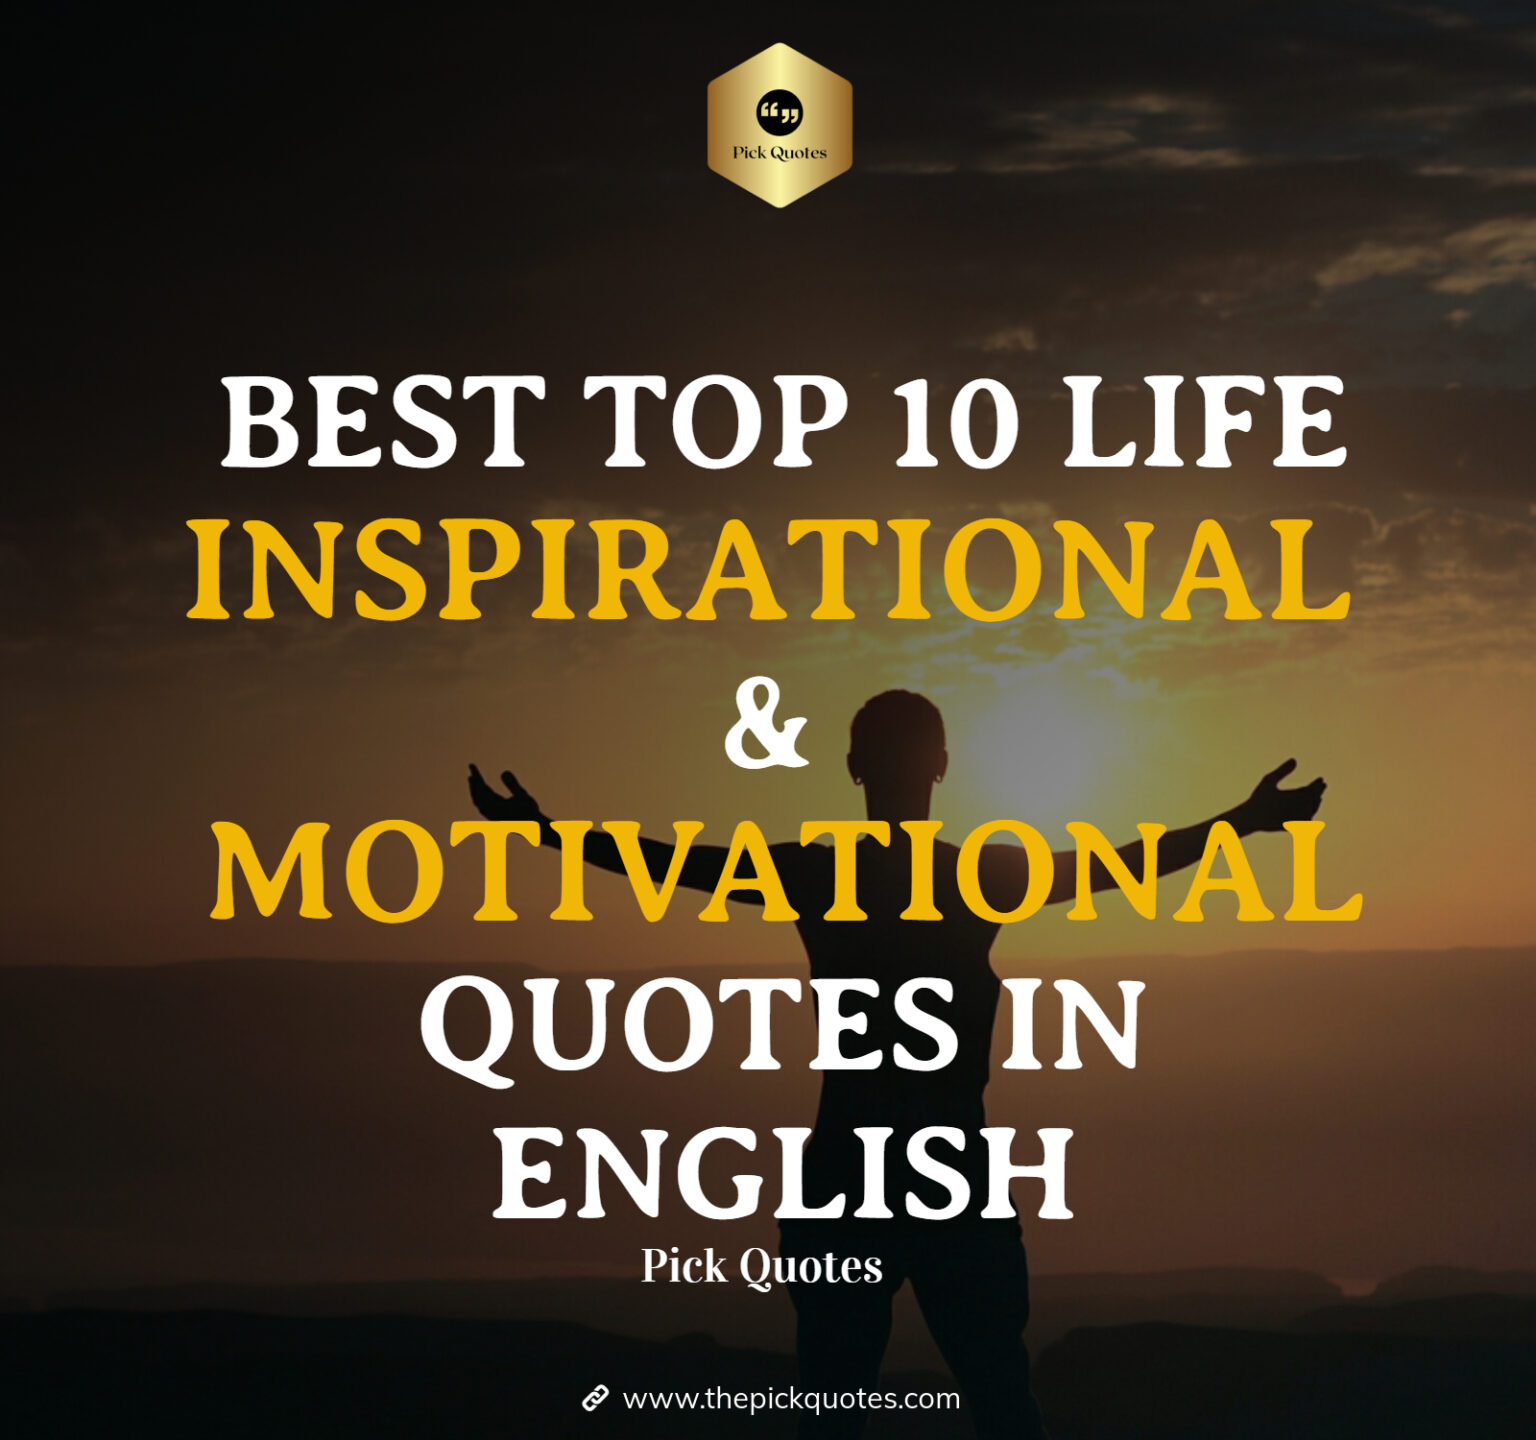 Best Top 10 Life Inspirational & Motivational Quotes - Success Quotes